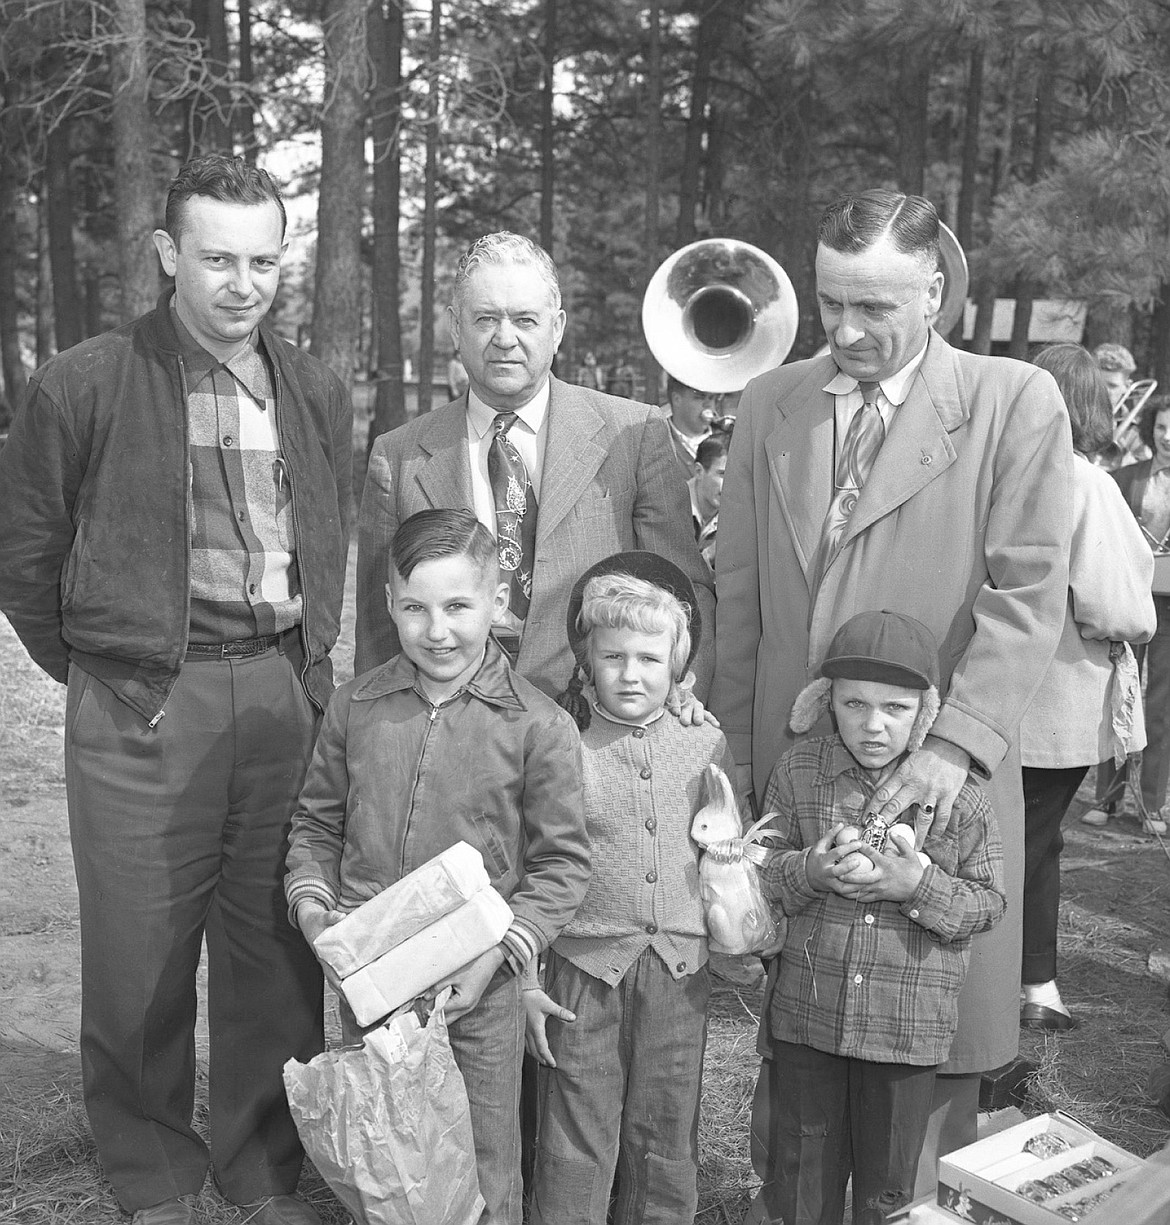 The first Lions Club Easter egg hunt on April 4, 1953. In back row is Stan London, Dwight Lohn and Henry Eckleberry. Front row are winners Walter Ren, 10, Cheryl Christensen, 6, and Edward Stanley Naylor, 5. (Mel Ruder photo)